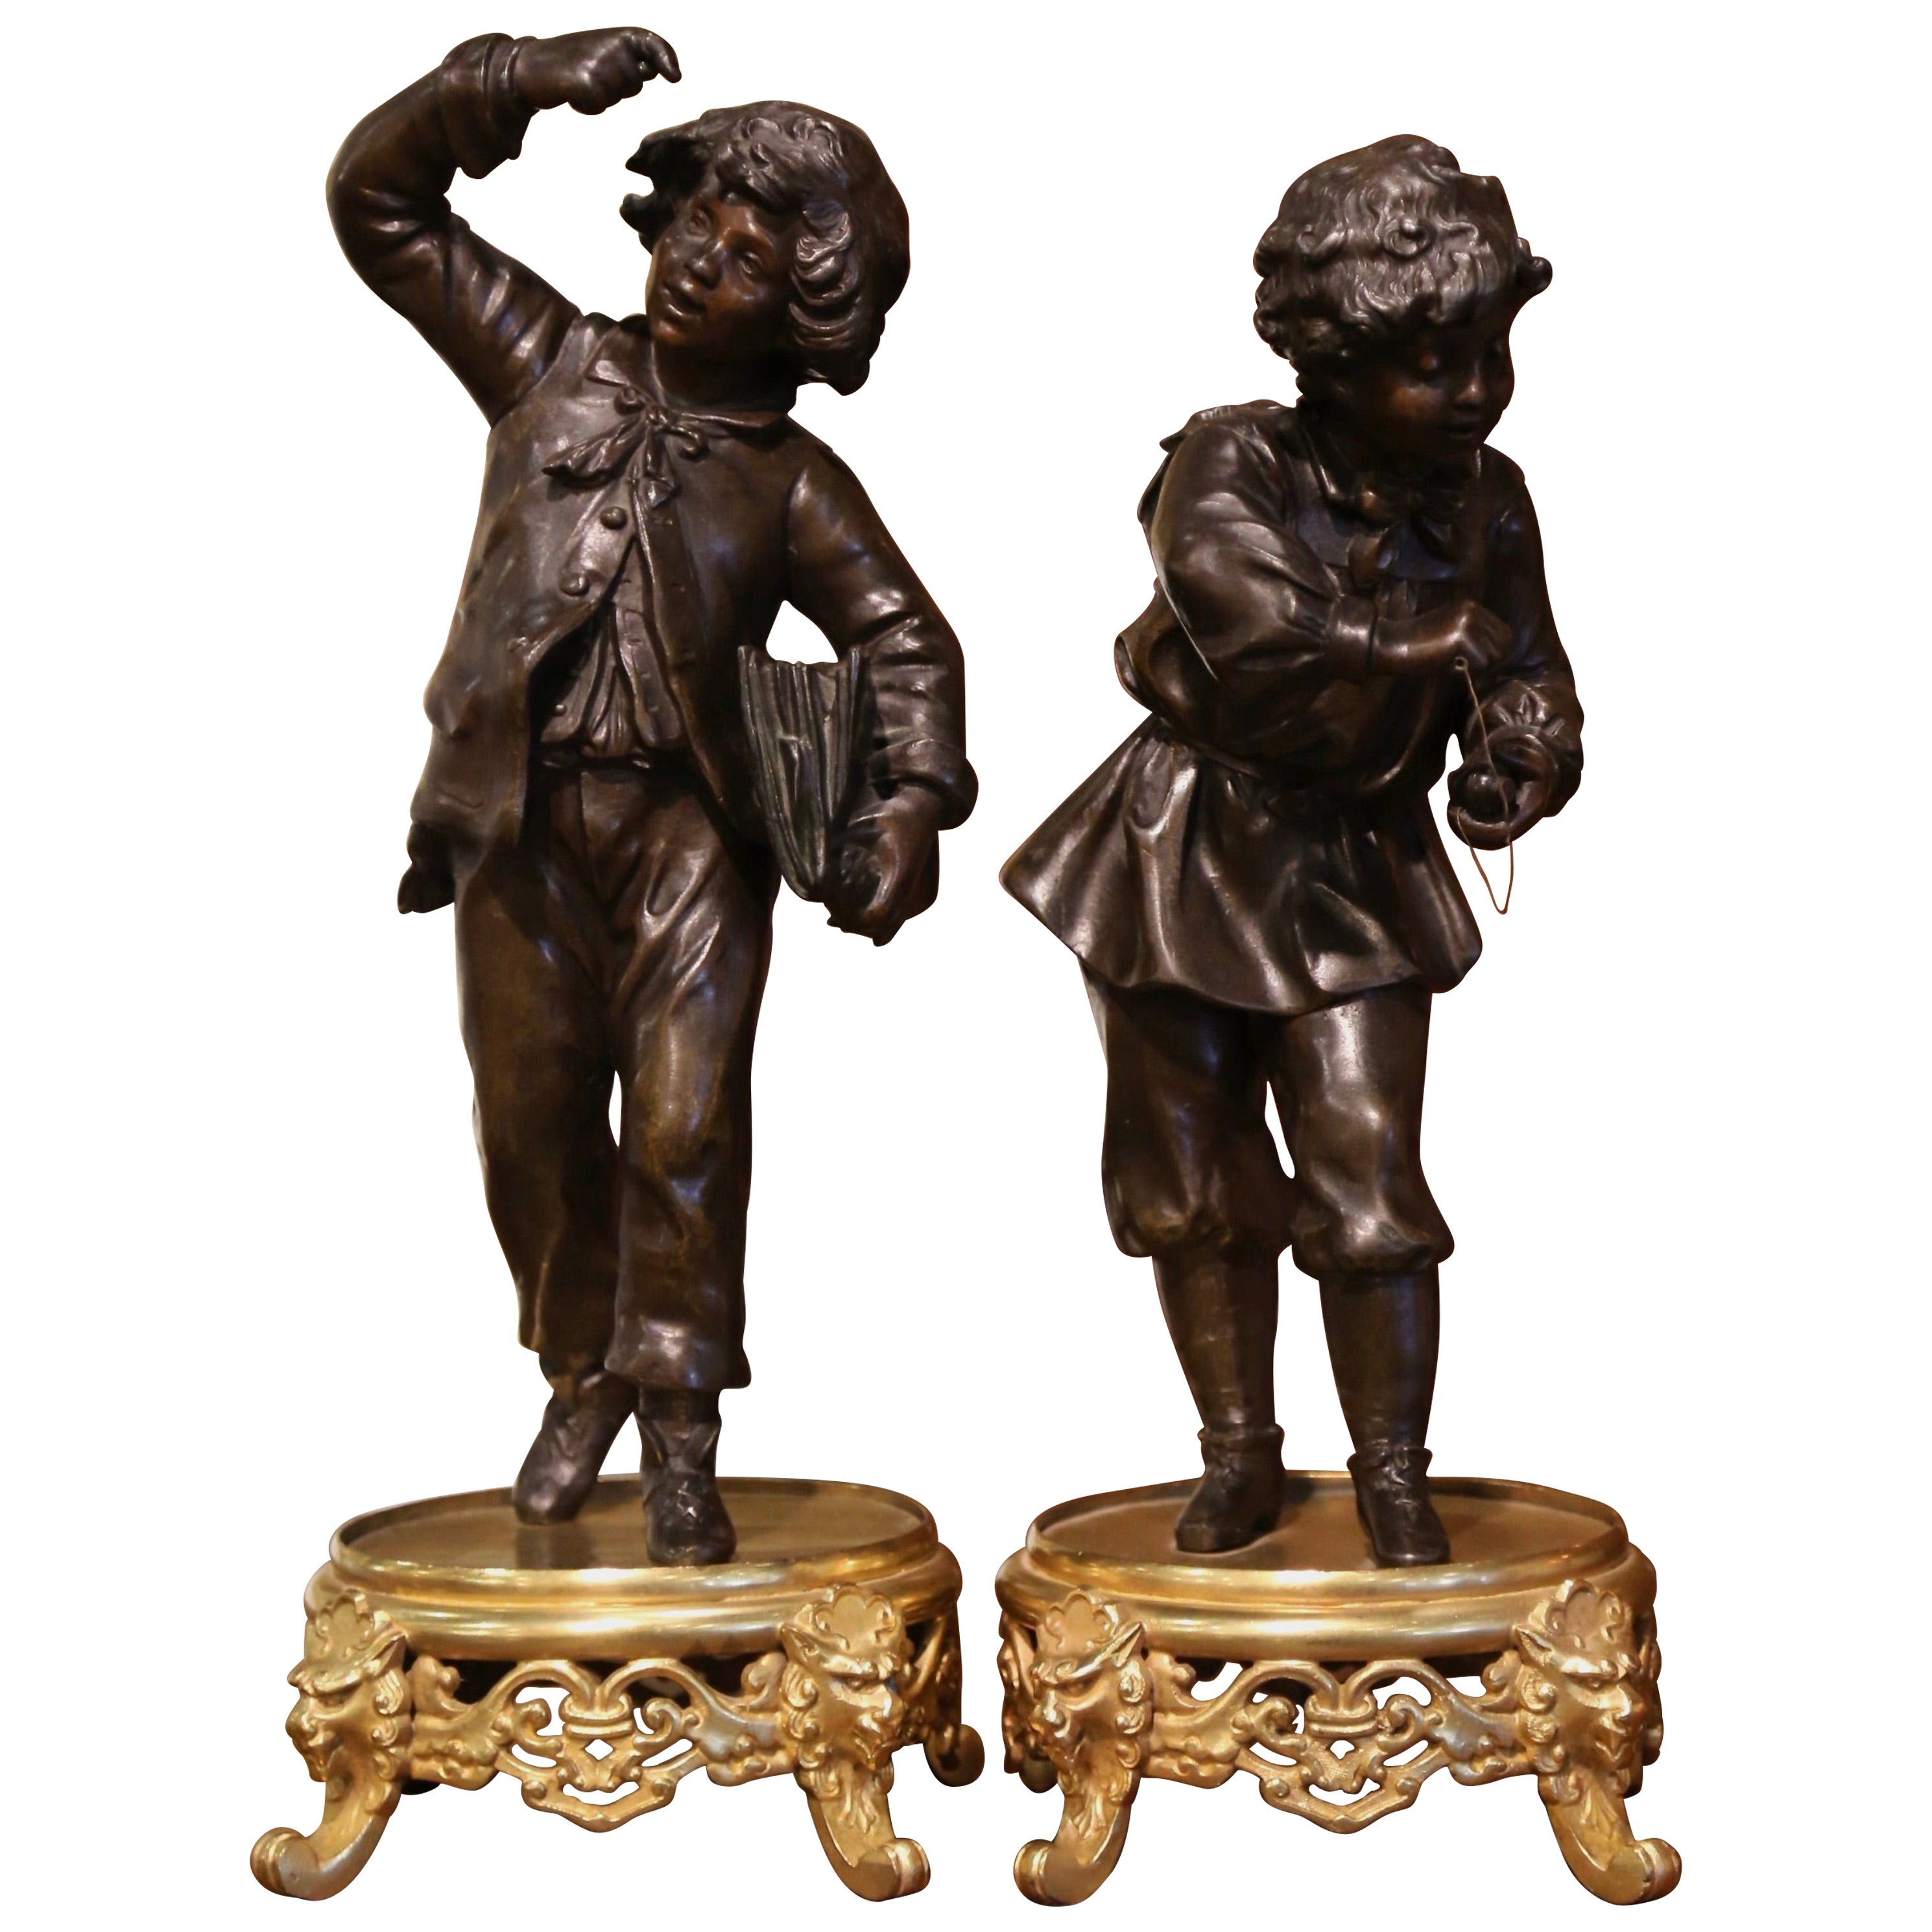 Pair of 19th Century French Spelter and Bronze Boy Figurative Sculptures For Sale